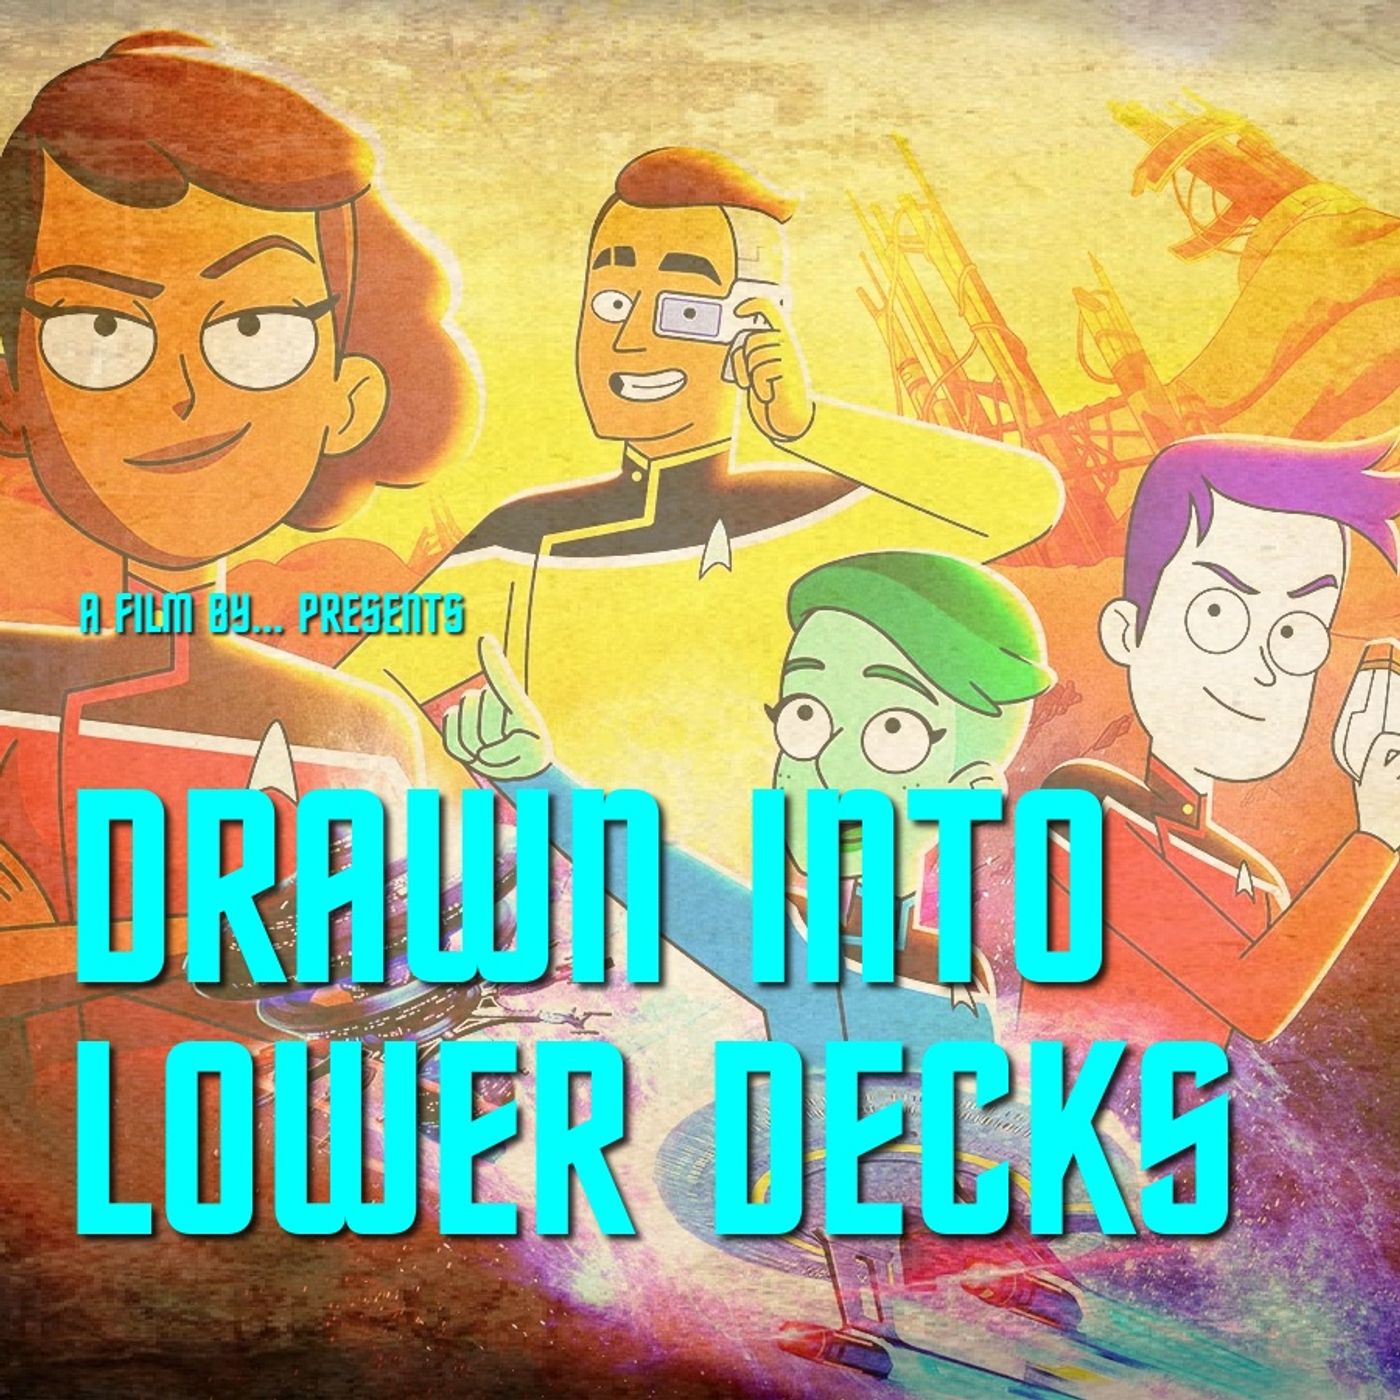 Drawn Into Lower Decks: recapping The Inner Fight with it's Director Brandon Williams